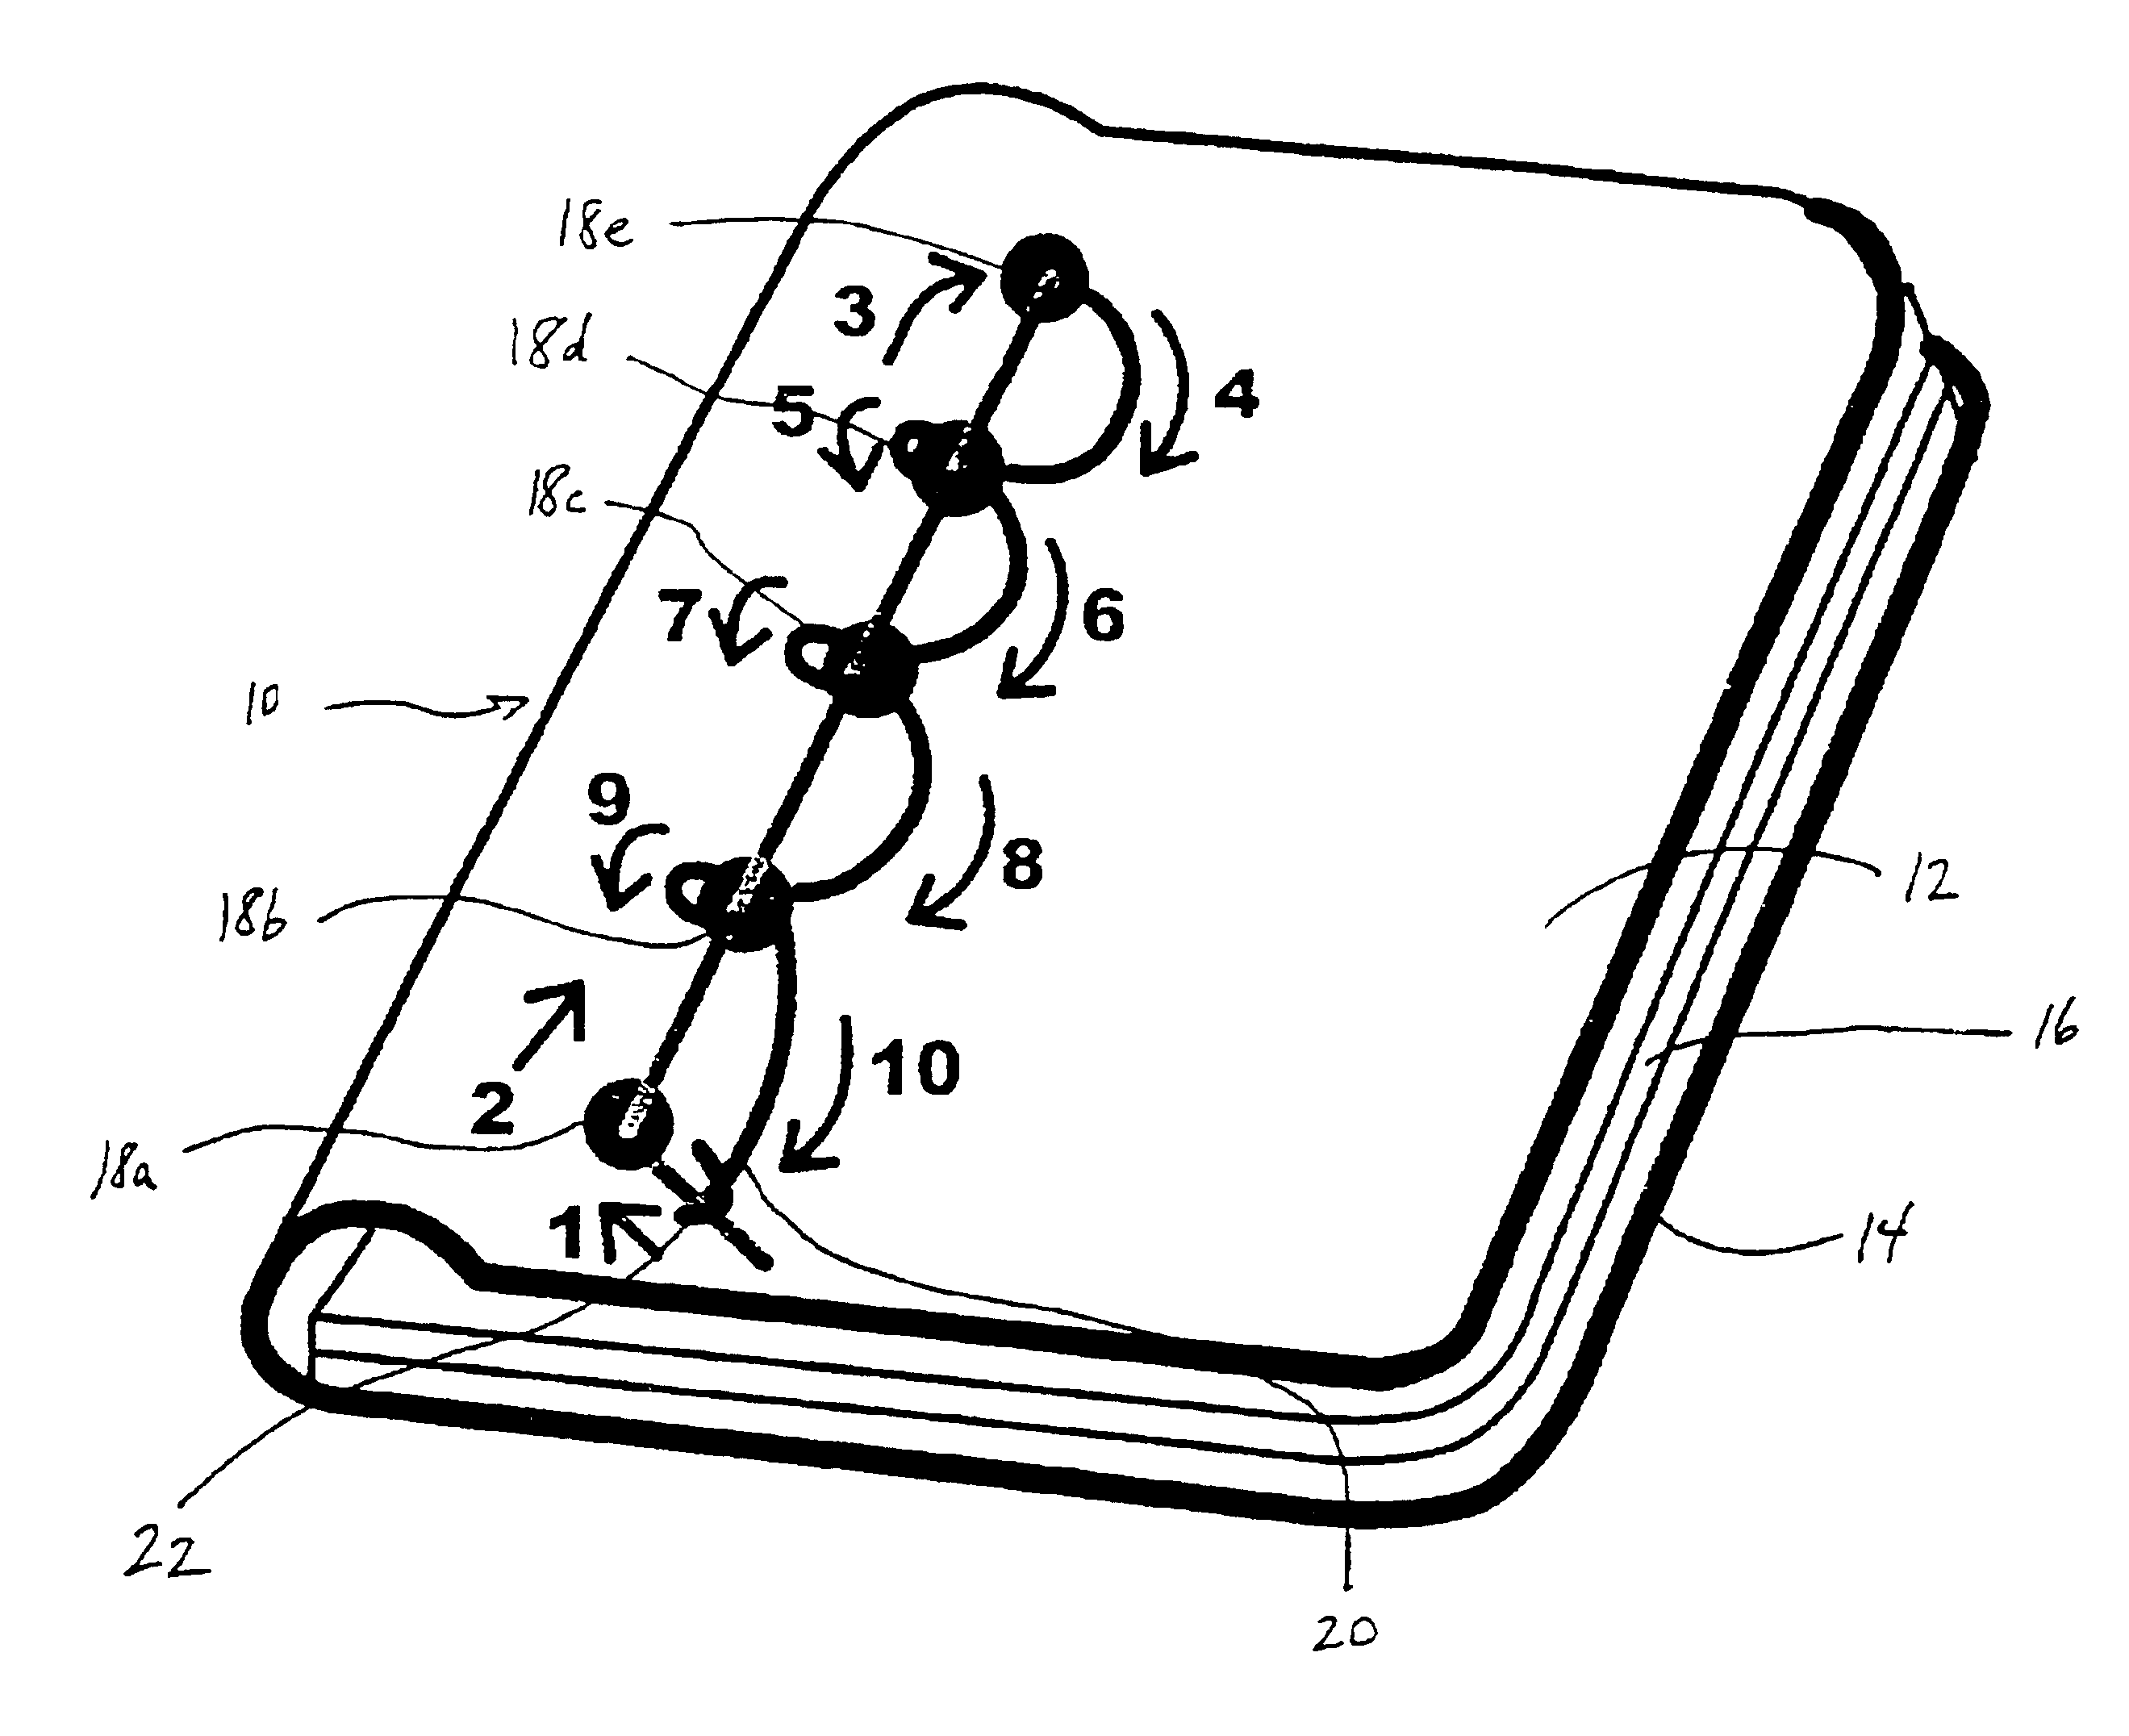 Foam book with improved binding and method